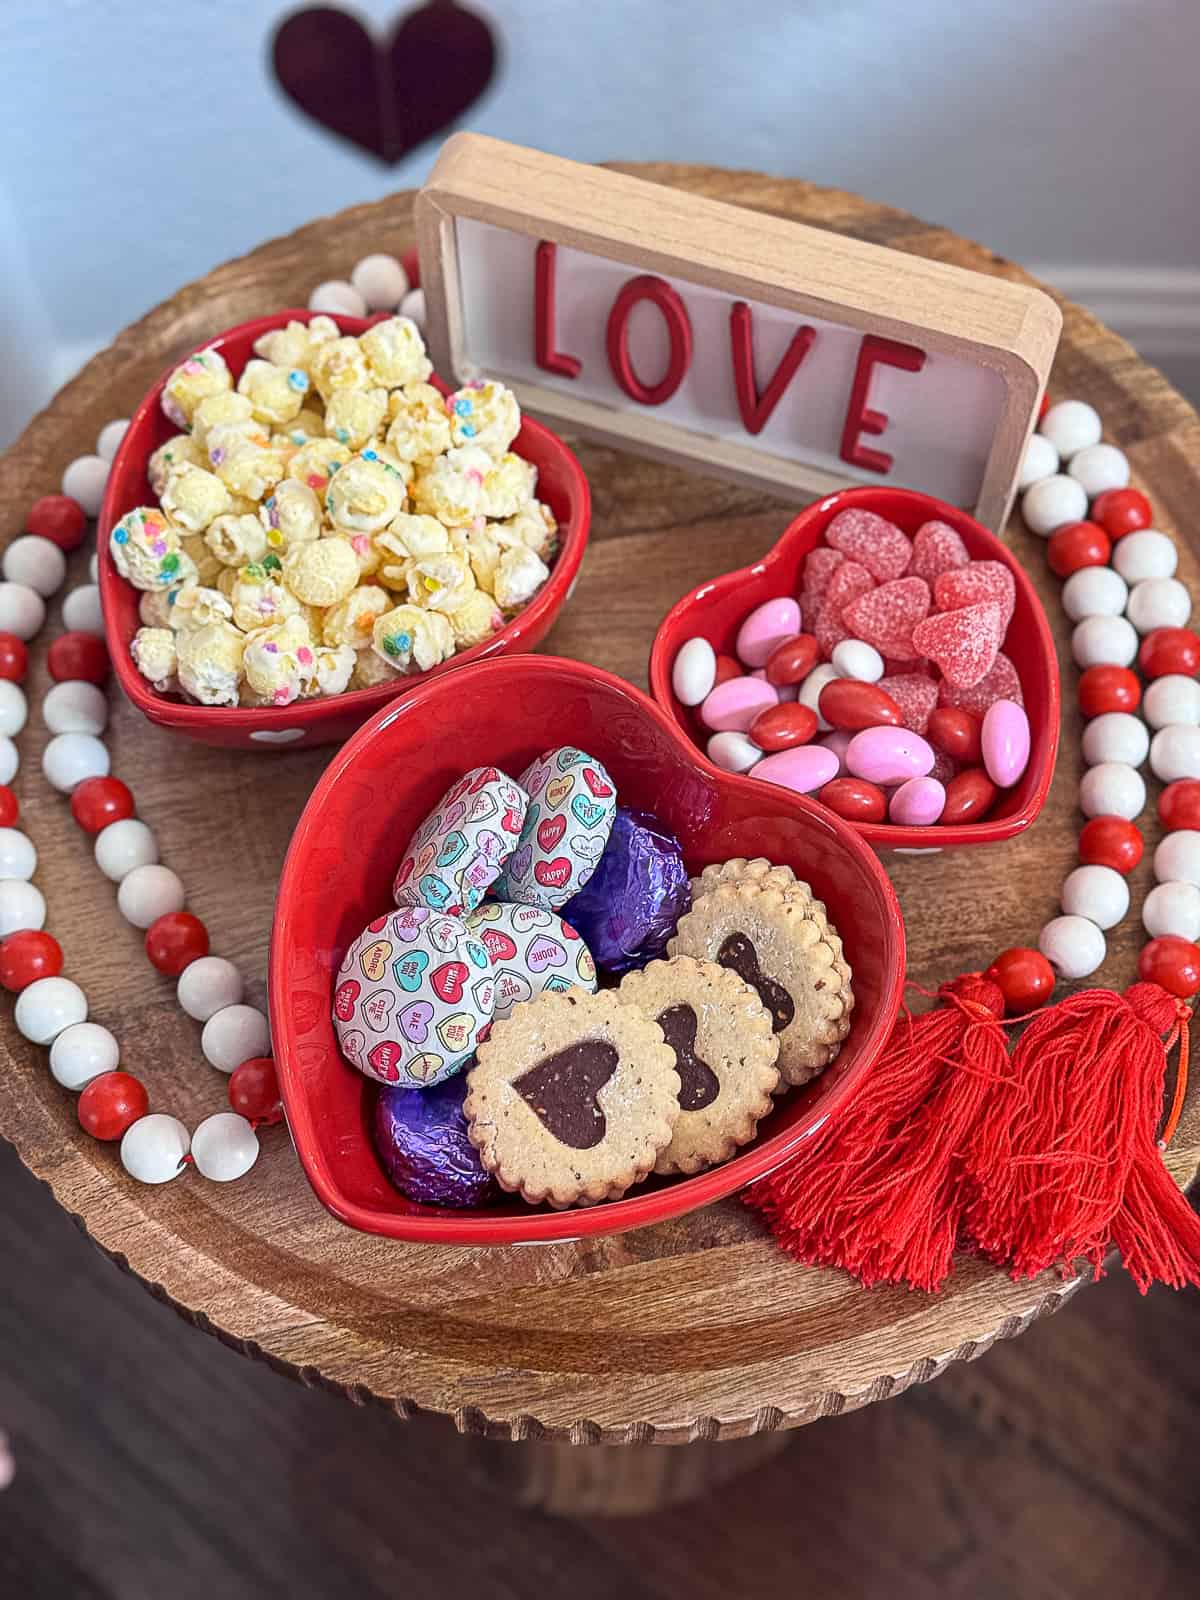 Valentine's Day entryway table with heart snack bowls filled with chocolate and treats